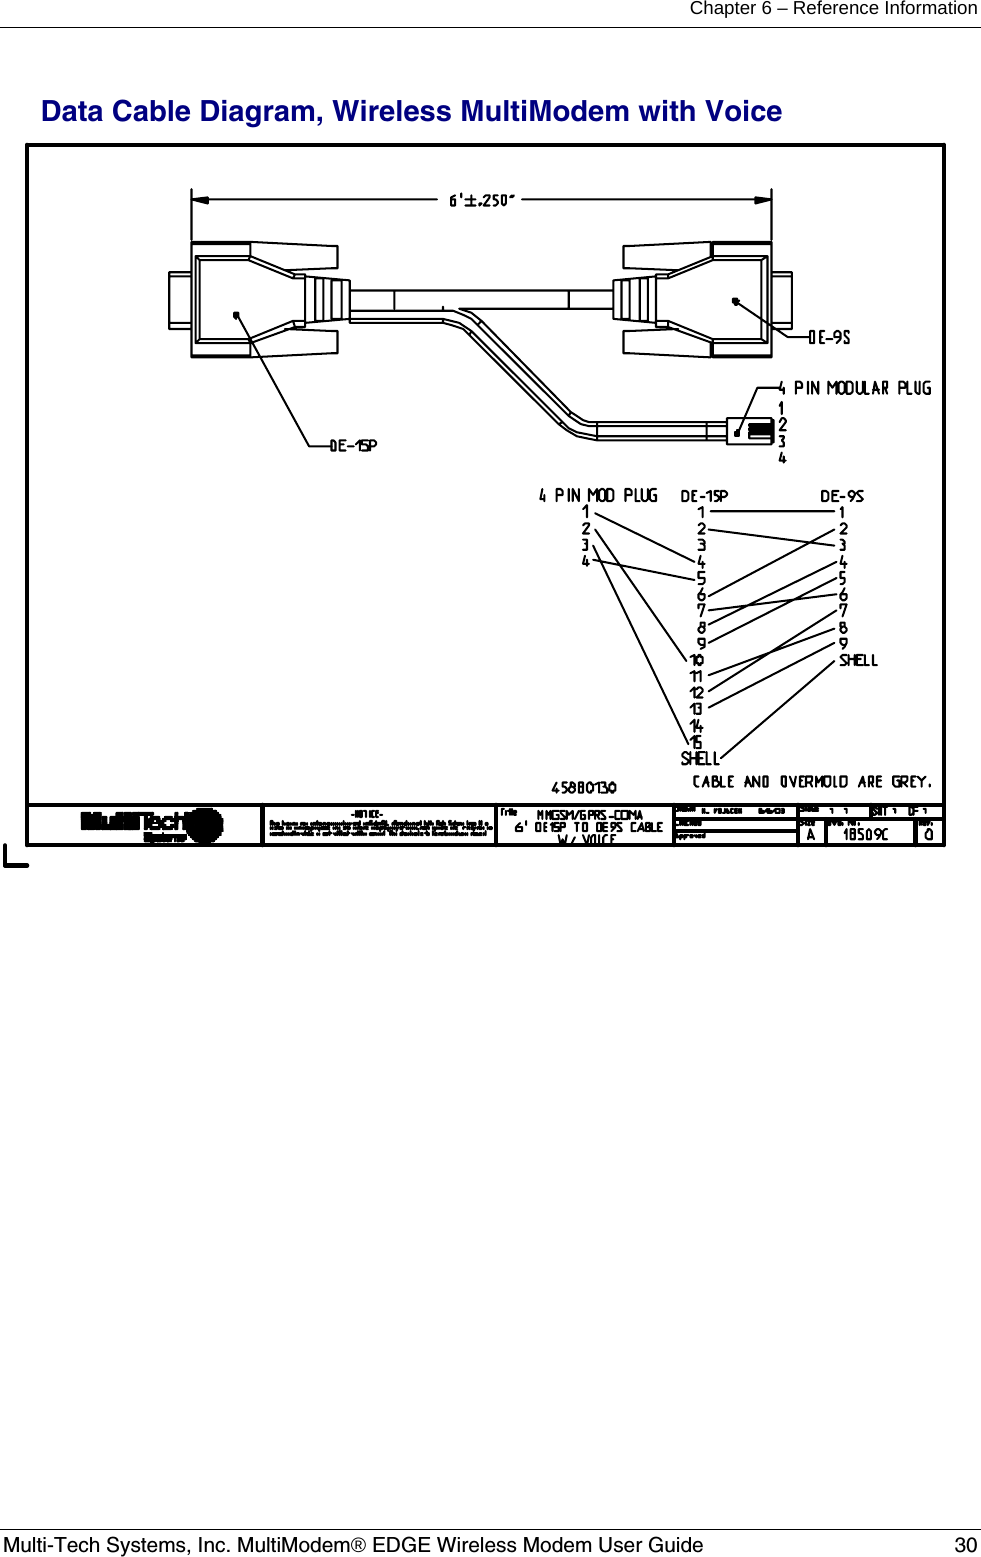 Chapter 6 – Reference Information  Multi-Tech Systems, Inc. MultiModem® EDGE Wireless Modem User Guide  30  Data Cable Diagram, Wireless MultiModem with Voice   